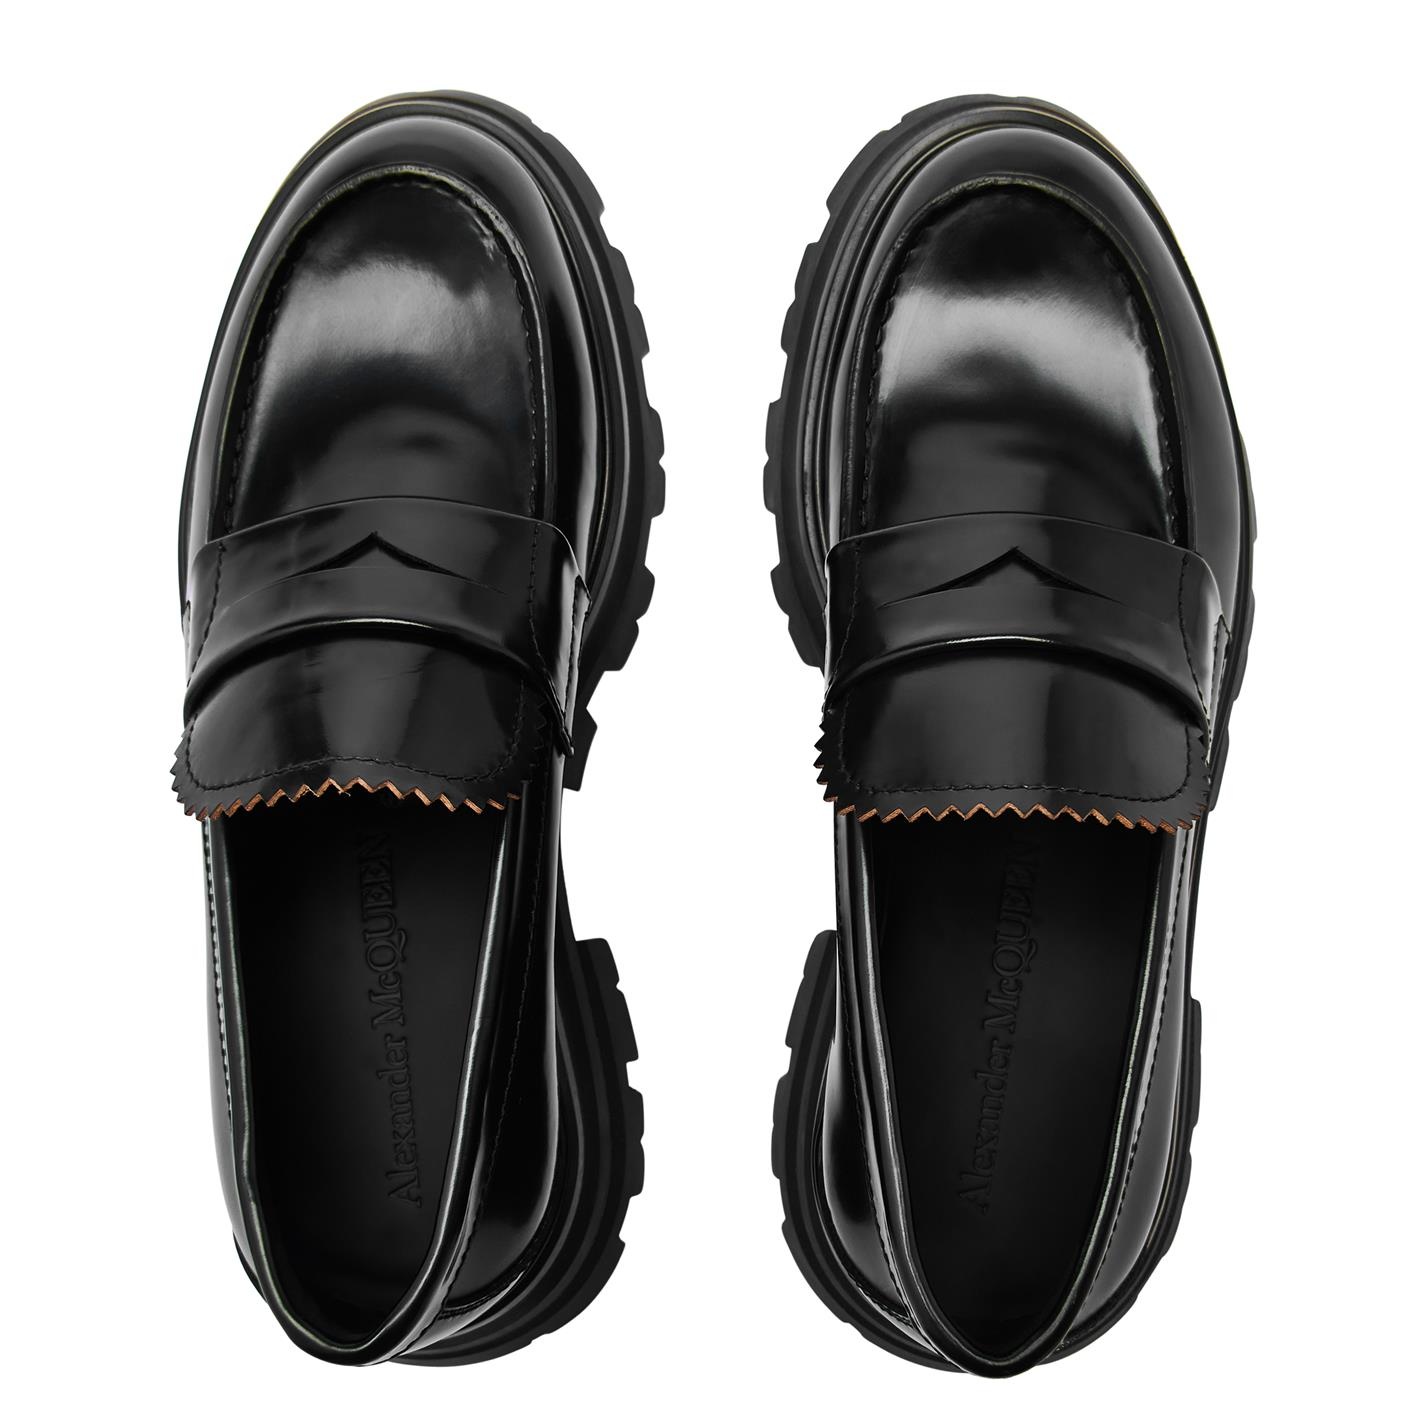 GLOSSY LOAFERS - 6